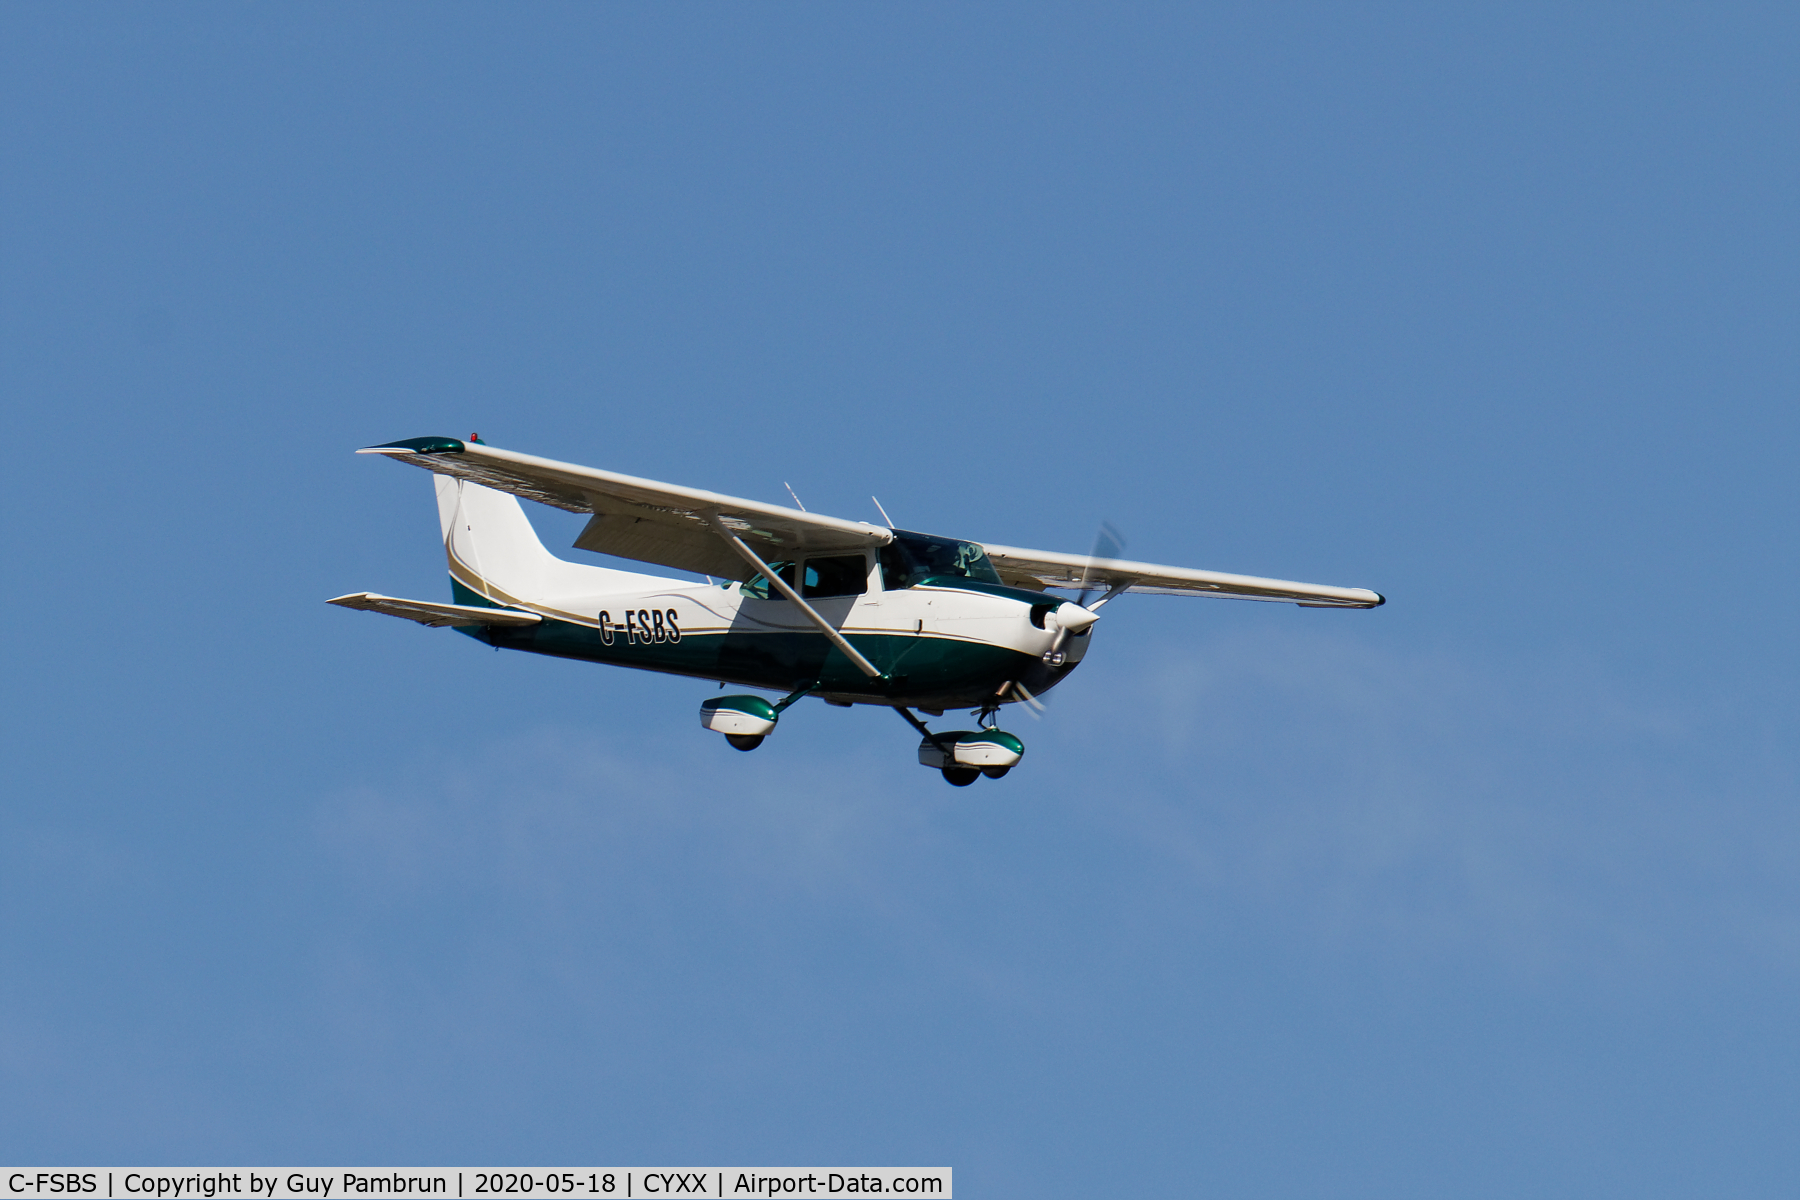 C-FSBS, 1976 Cessna 172N C/N 17268010, Landing on 19 for pilot briefing and departure to take part in 